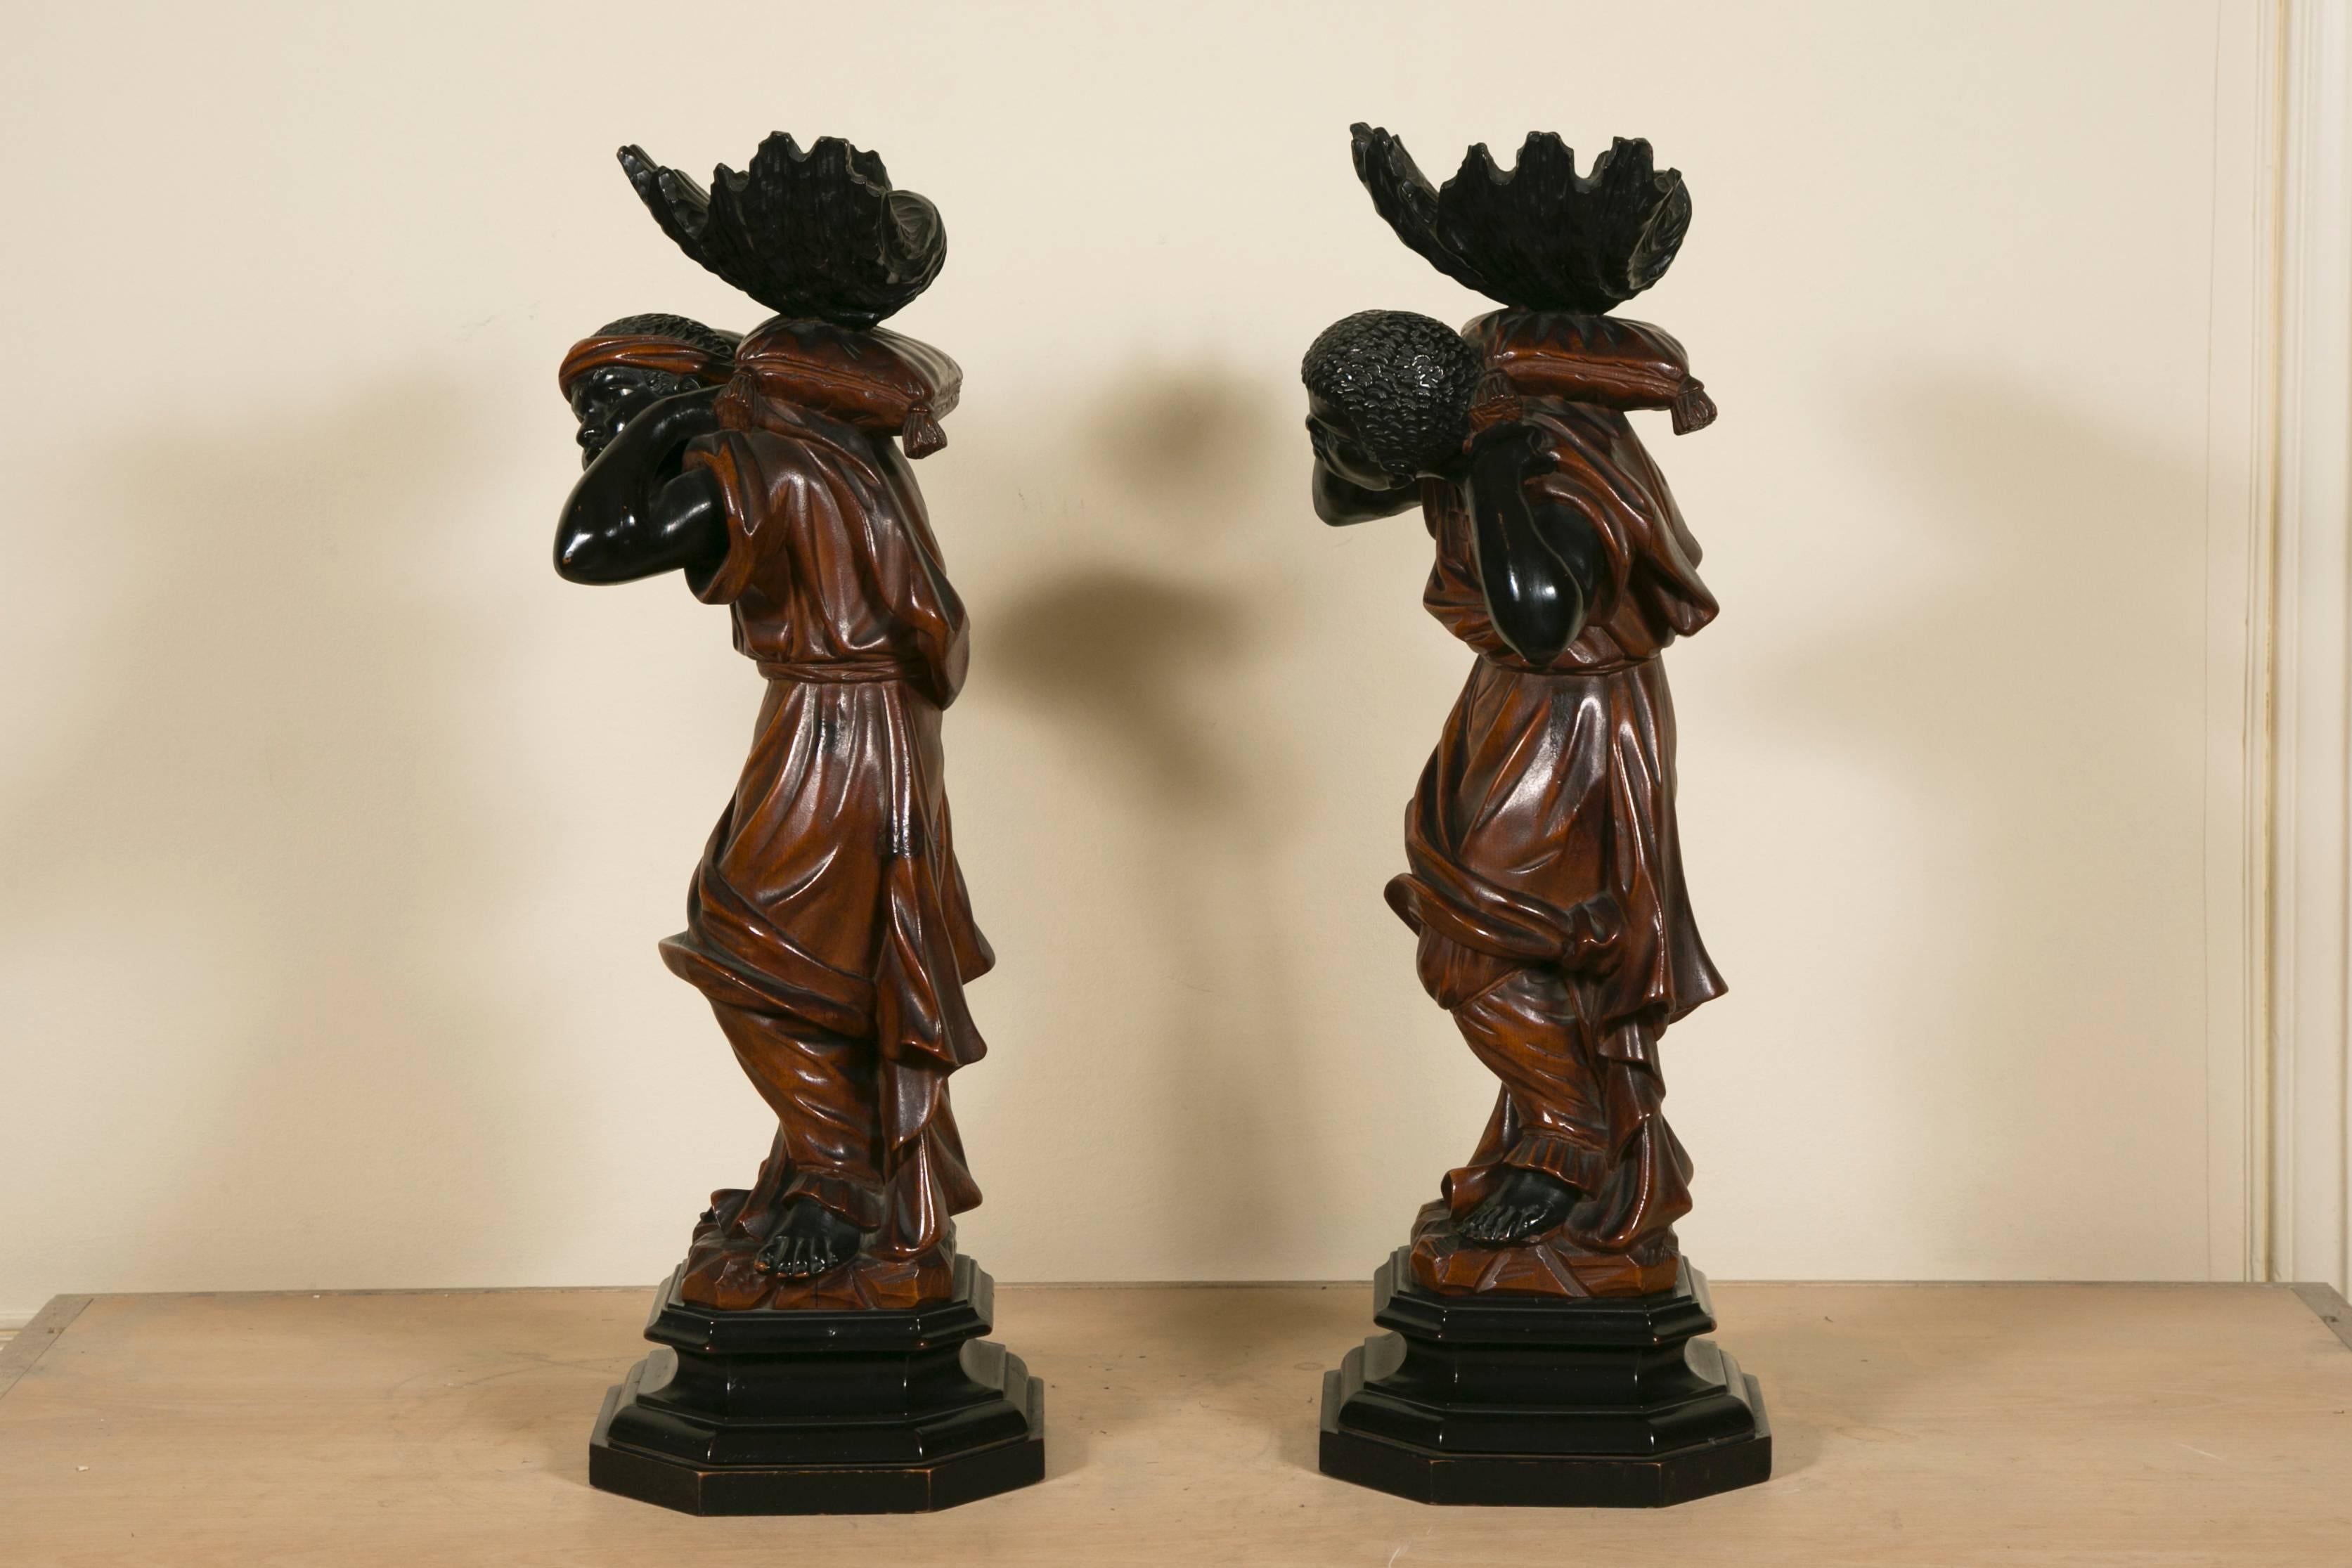 Exceptional and rare pair of 19th century wood carving figures beautifully executed with lacquered eyes and two color lacquered on the body. Figures are holding a shell on their back.